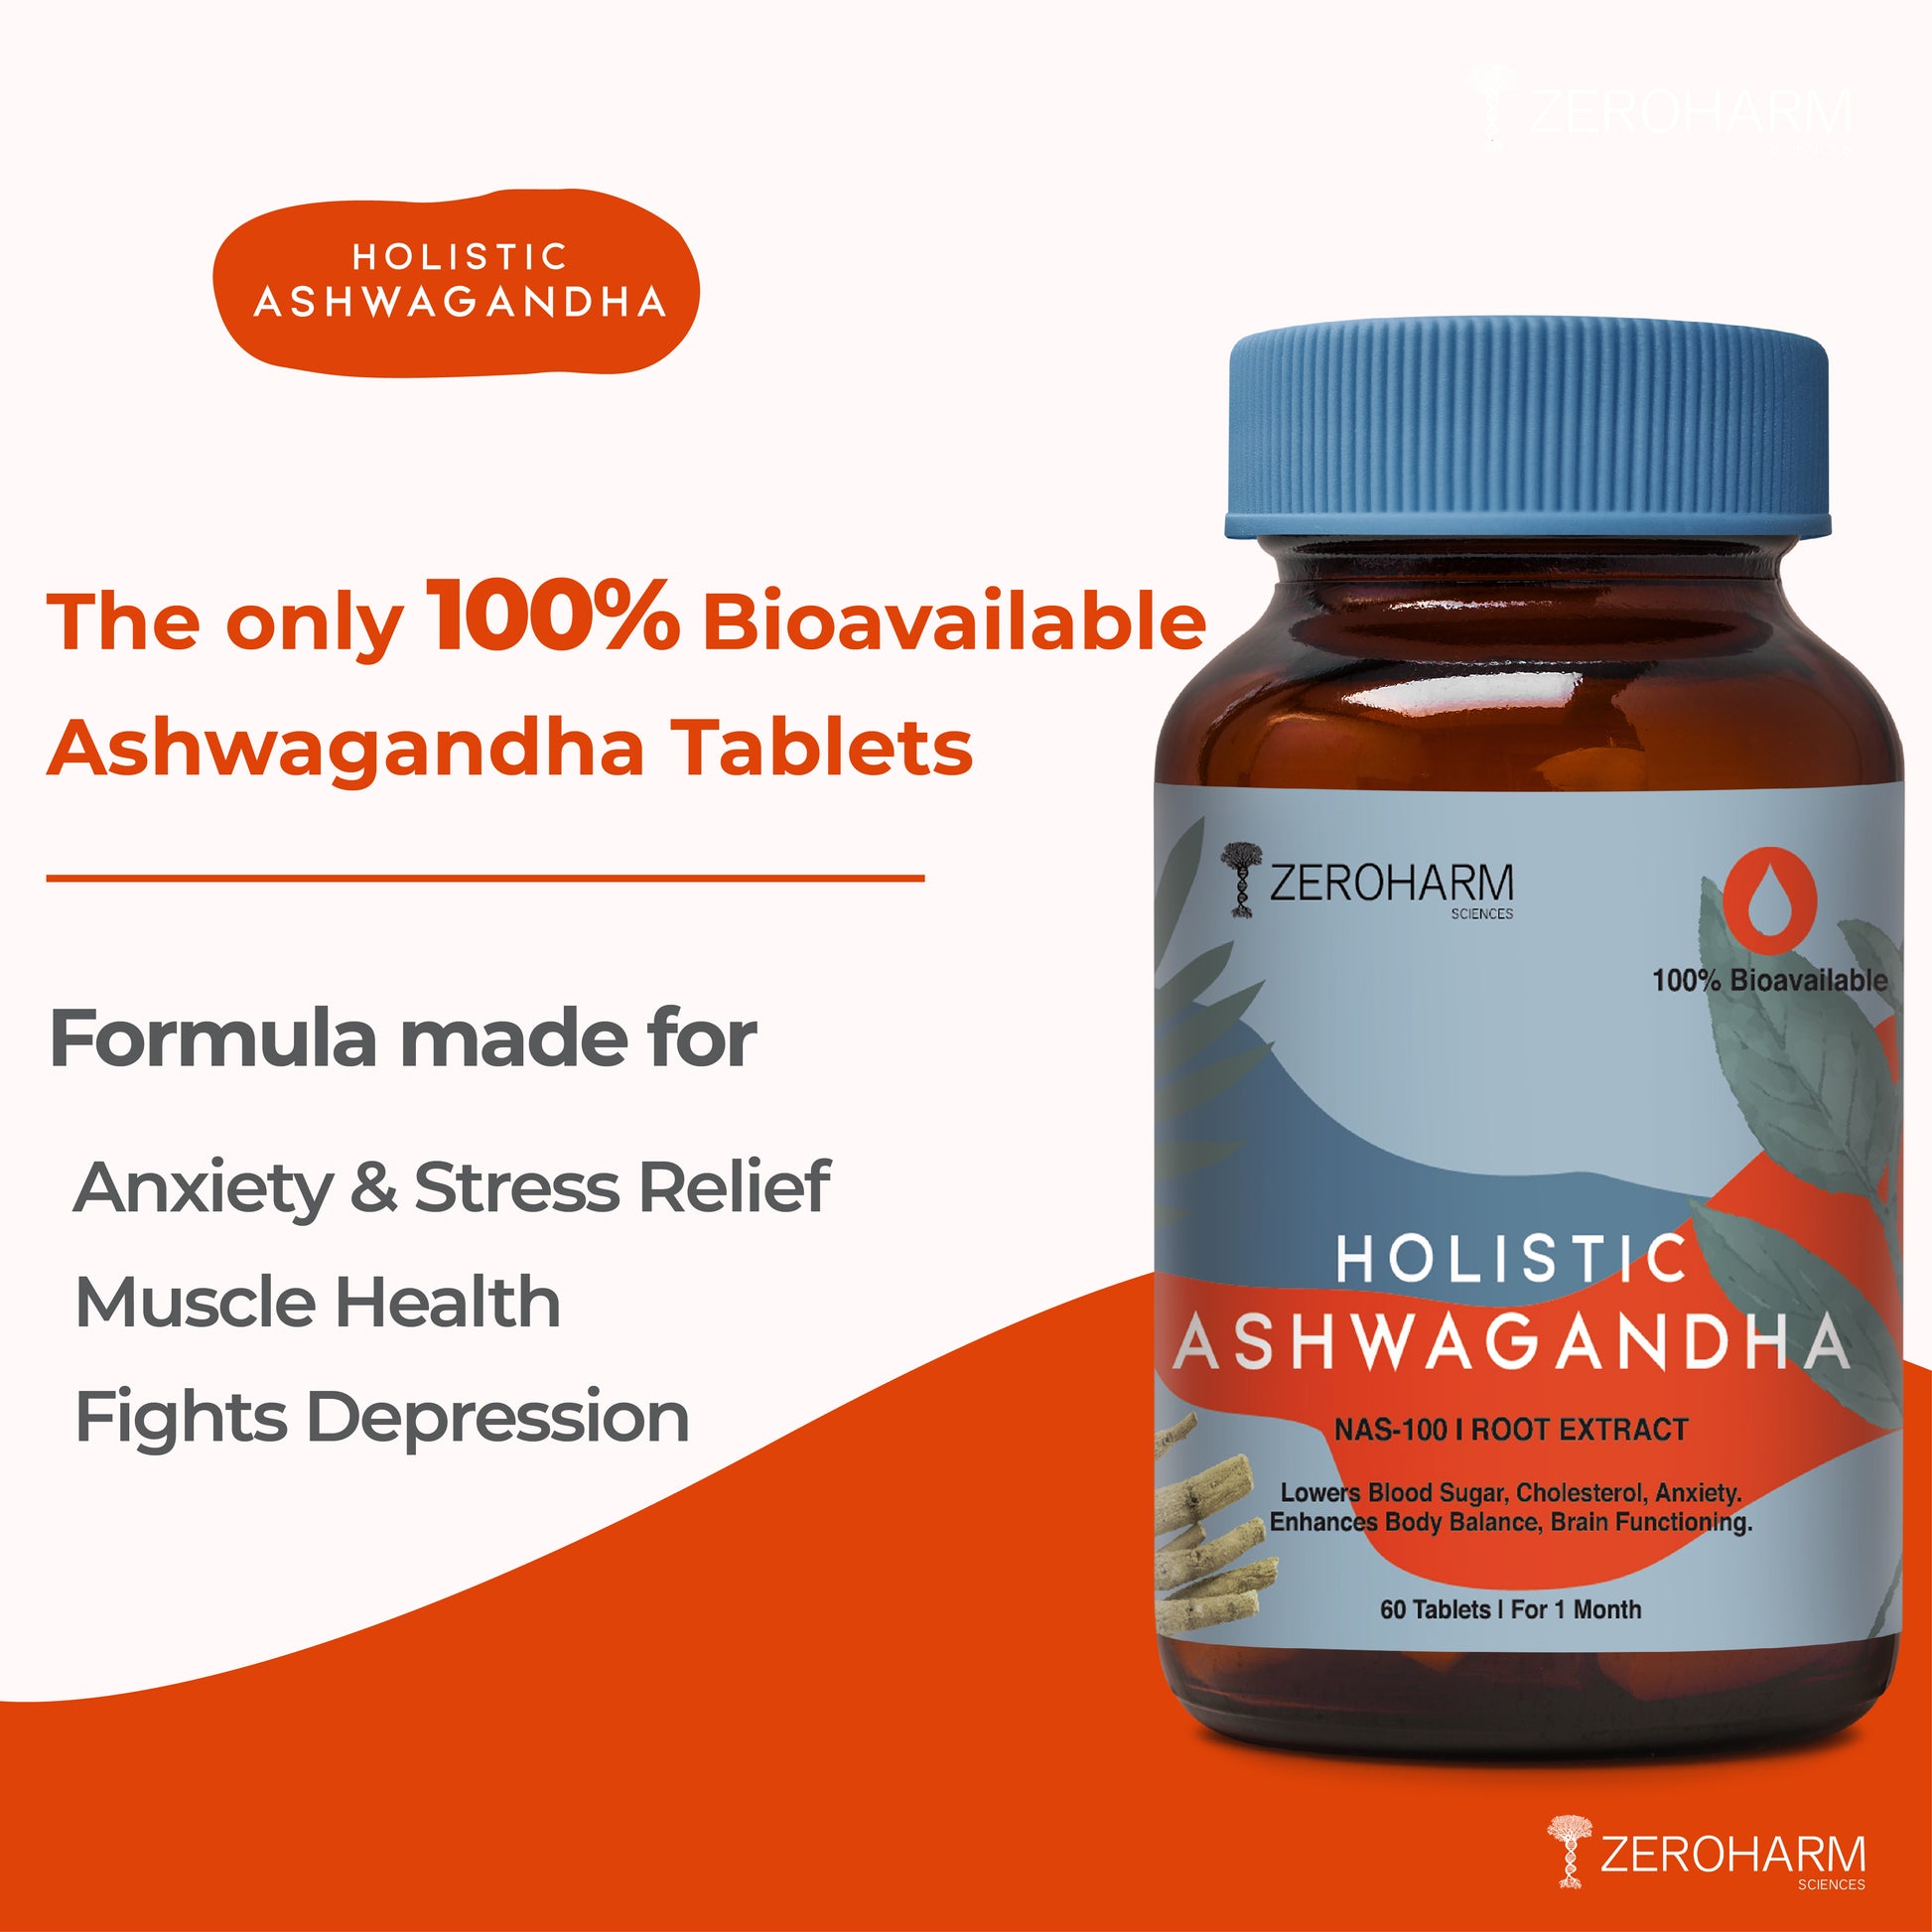 top rated ashwagandha formula made for anxiety and stress relief